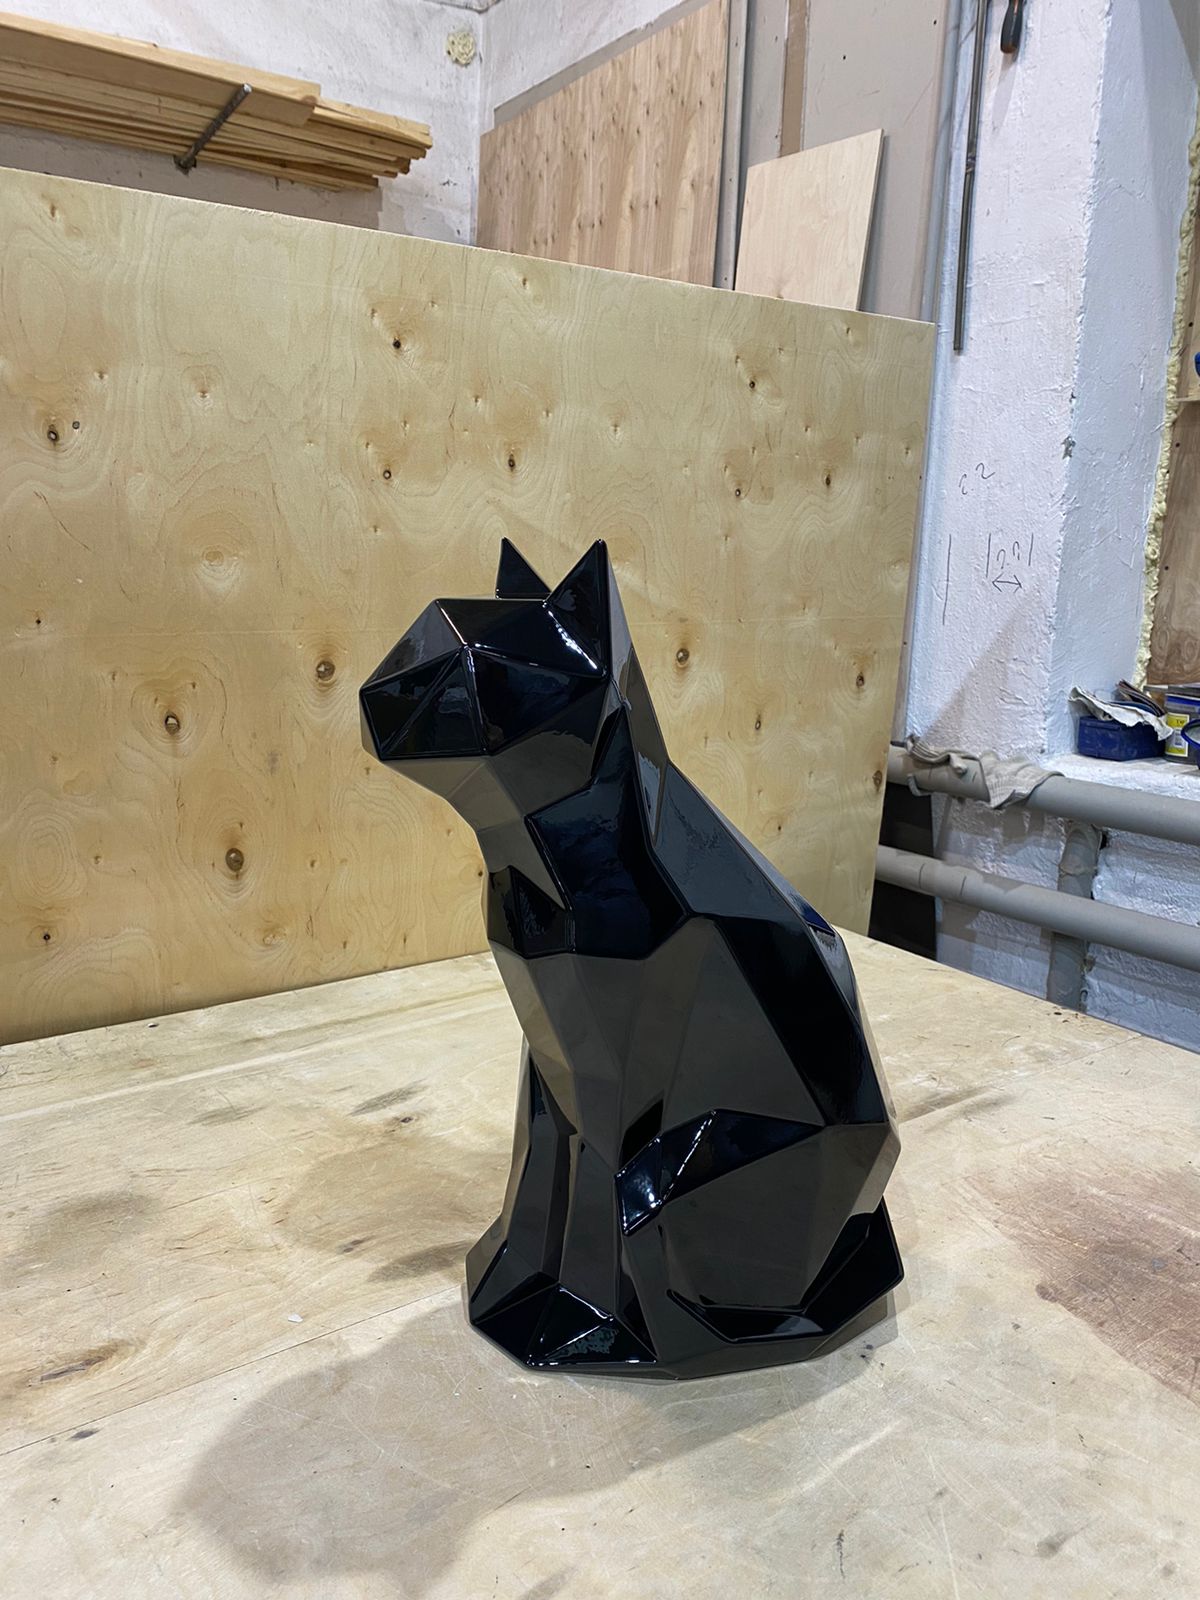 Stainless steel sculpture of CAT freeshipping - Ponoma